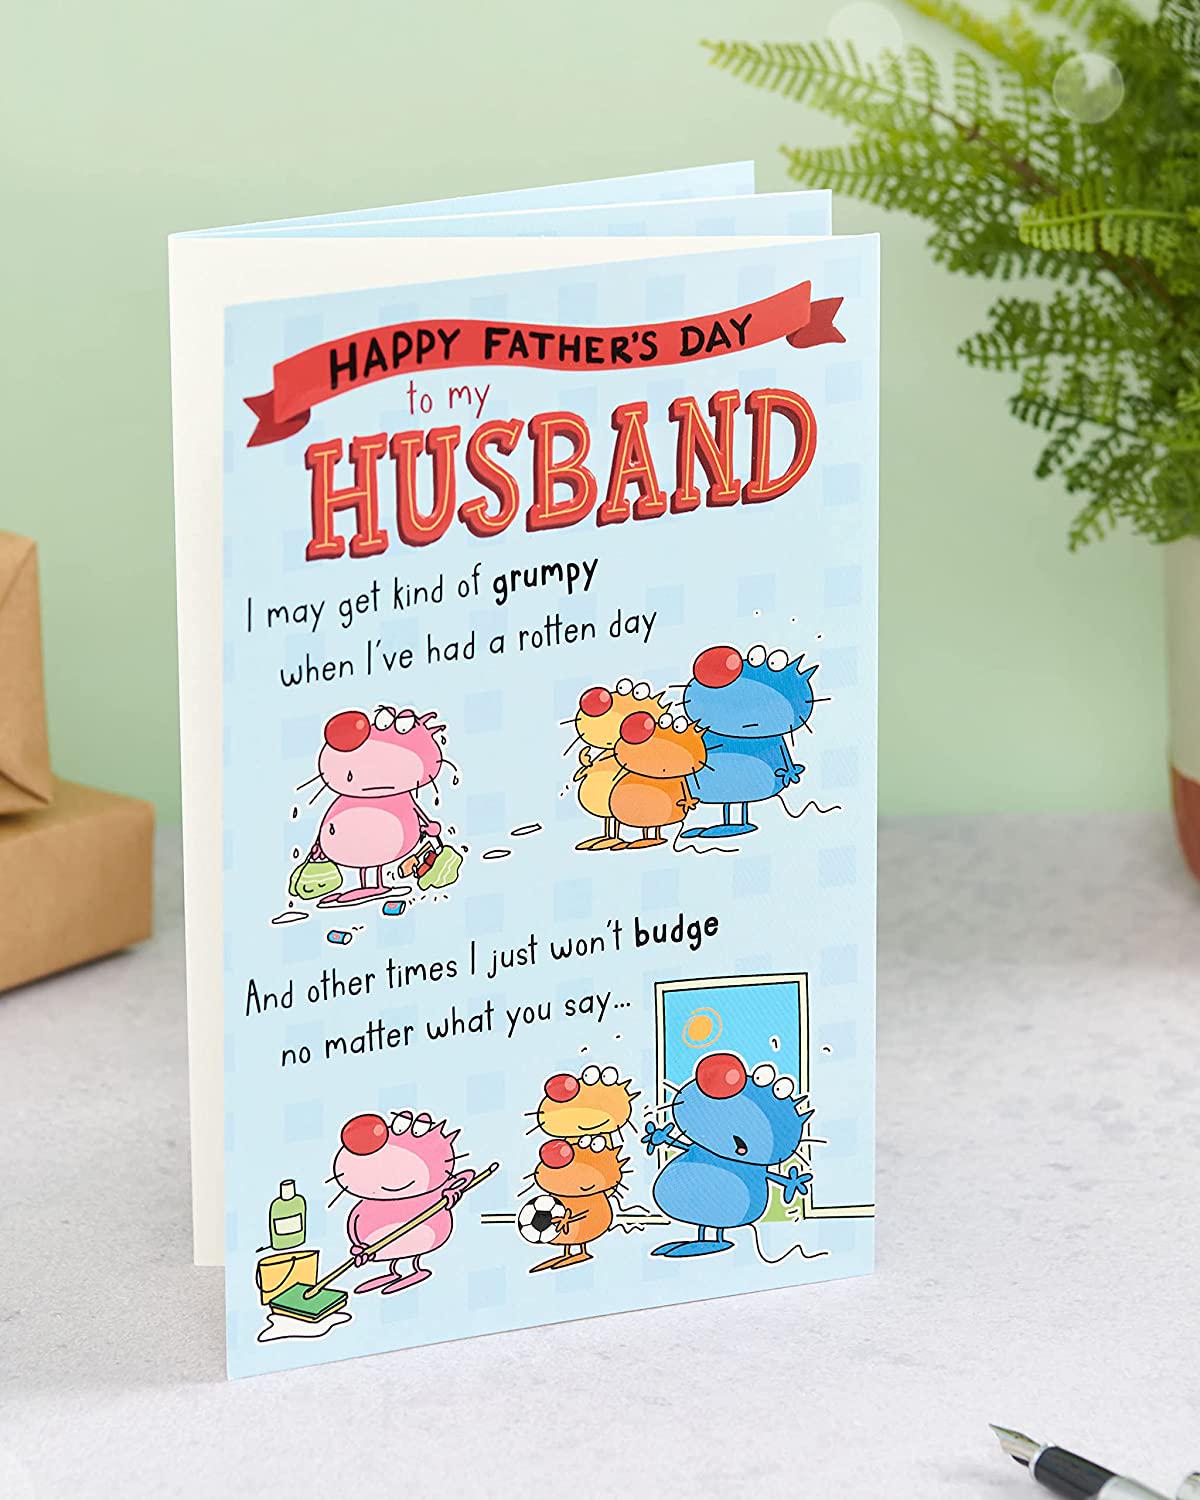 UK Greetings, Father's Day Card - To My Husband Father's Day Card - Funny Father's Day Card - Joke Father's Day Card - Father's Day Card foe Husband